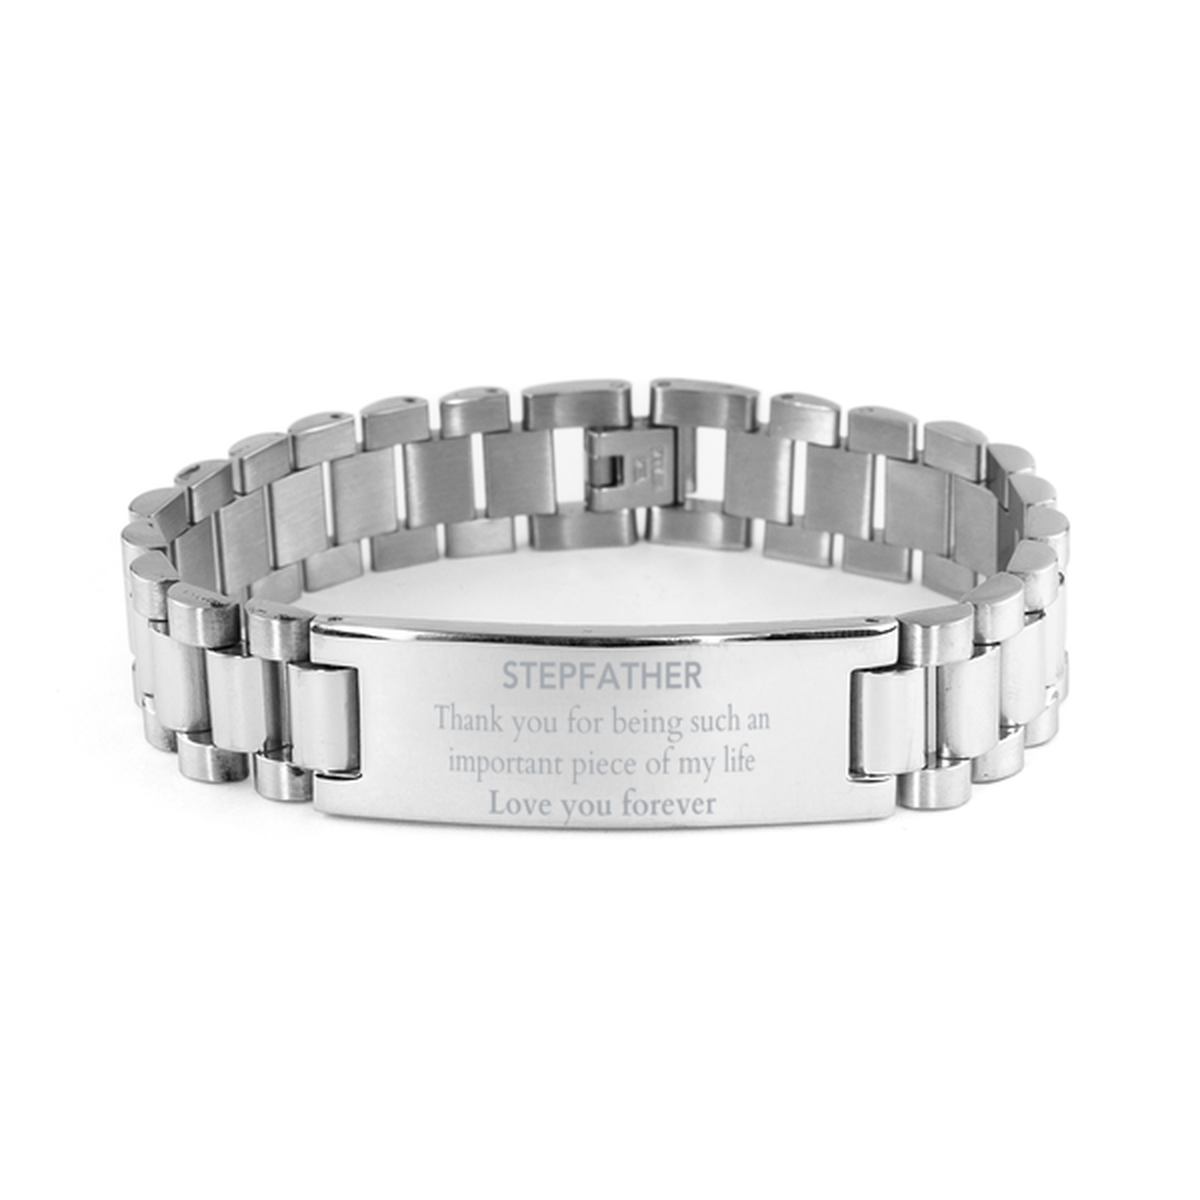 Appropriate Stepfather Ladder Stainless Steel Bracelet Epic Birthday Gifts for Stepfather Thank you for being such an important piece of my life Stepfather Christmas Mothers Fathers Day